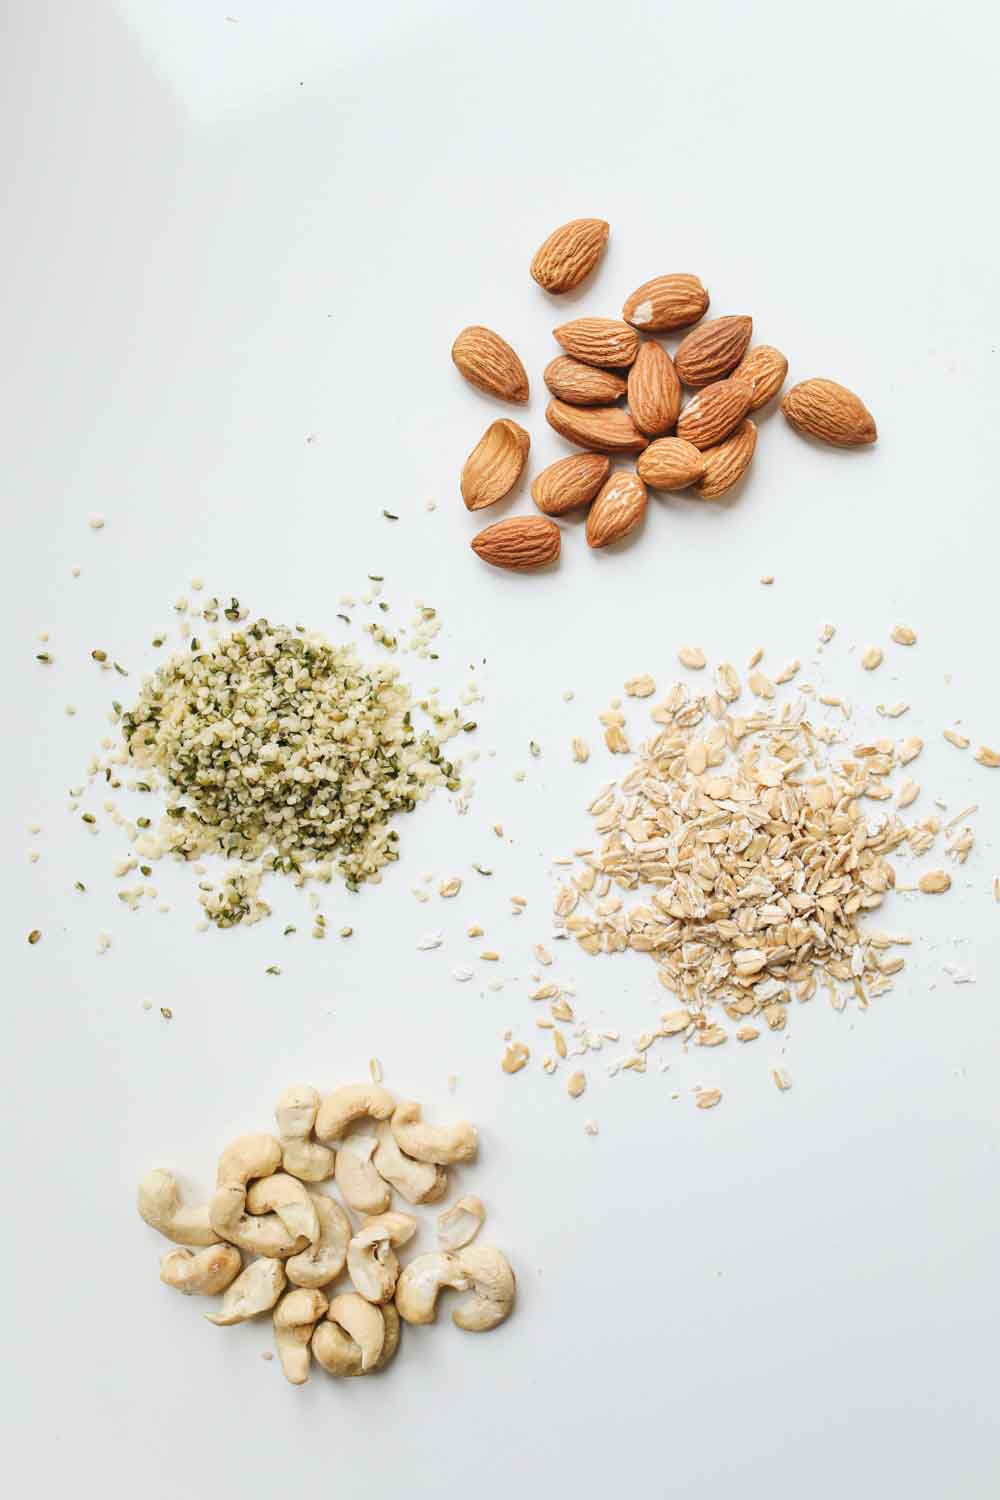 Different nuts and seeds on a white background